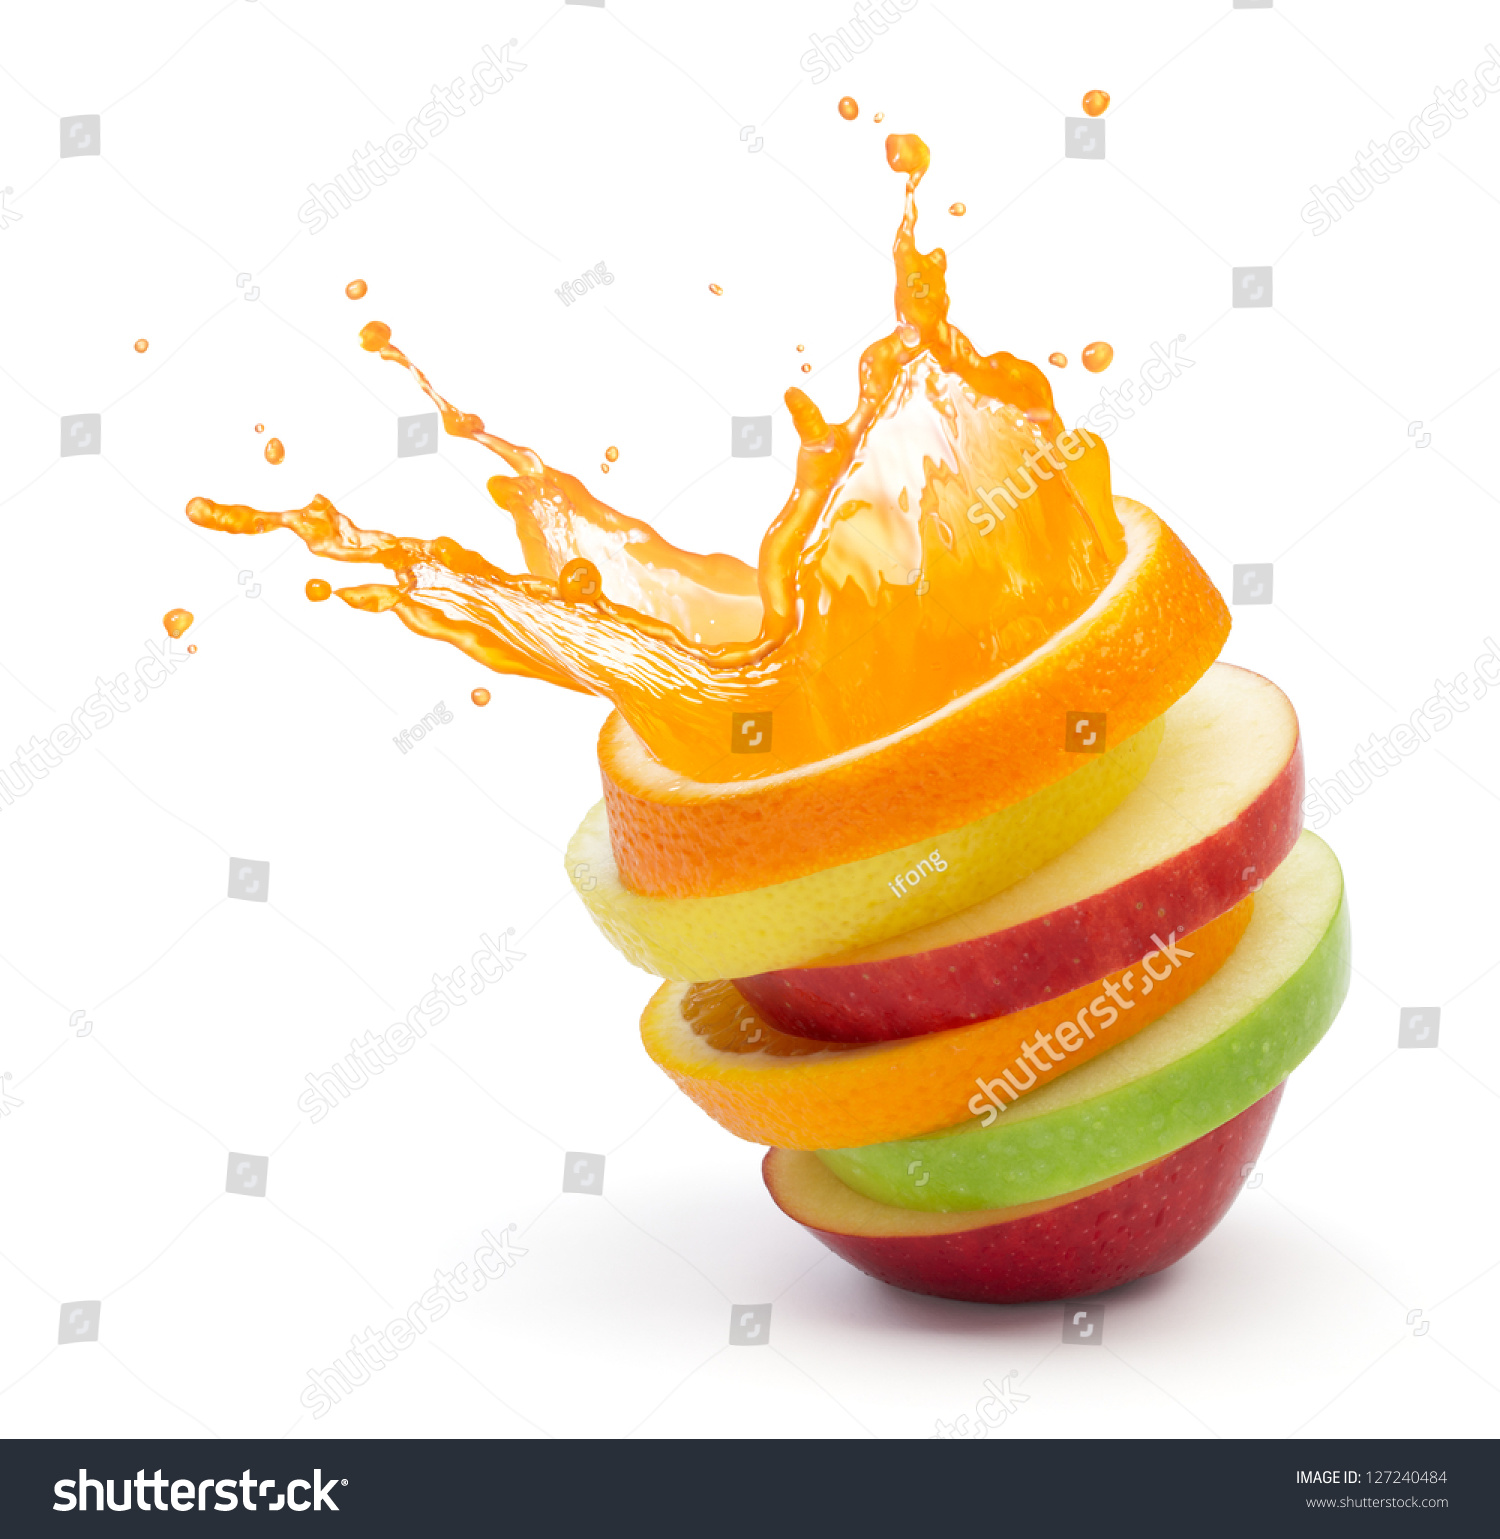 various type of fruit slices stacked with splash, fruit punch concept #127240484